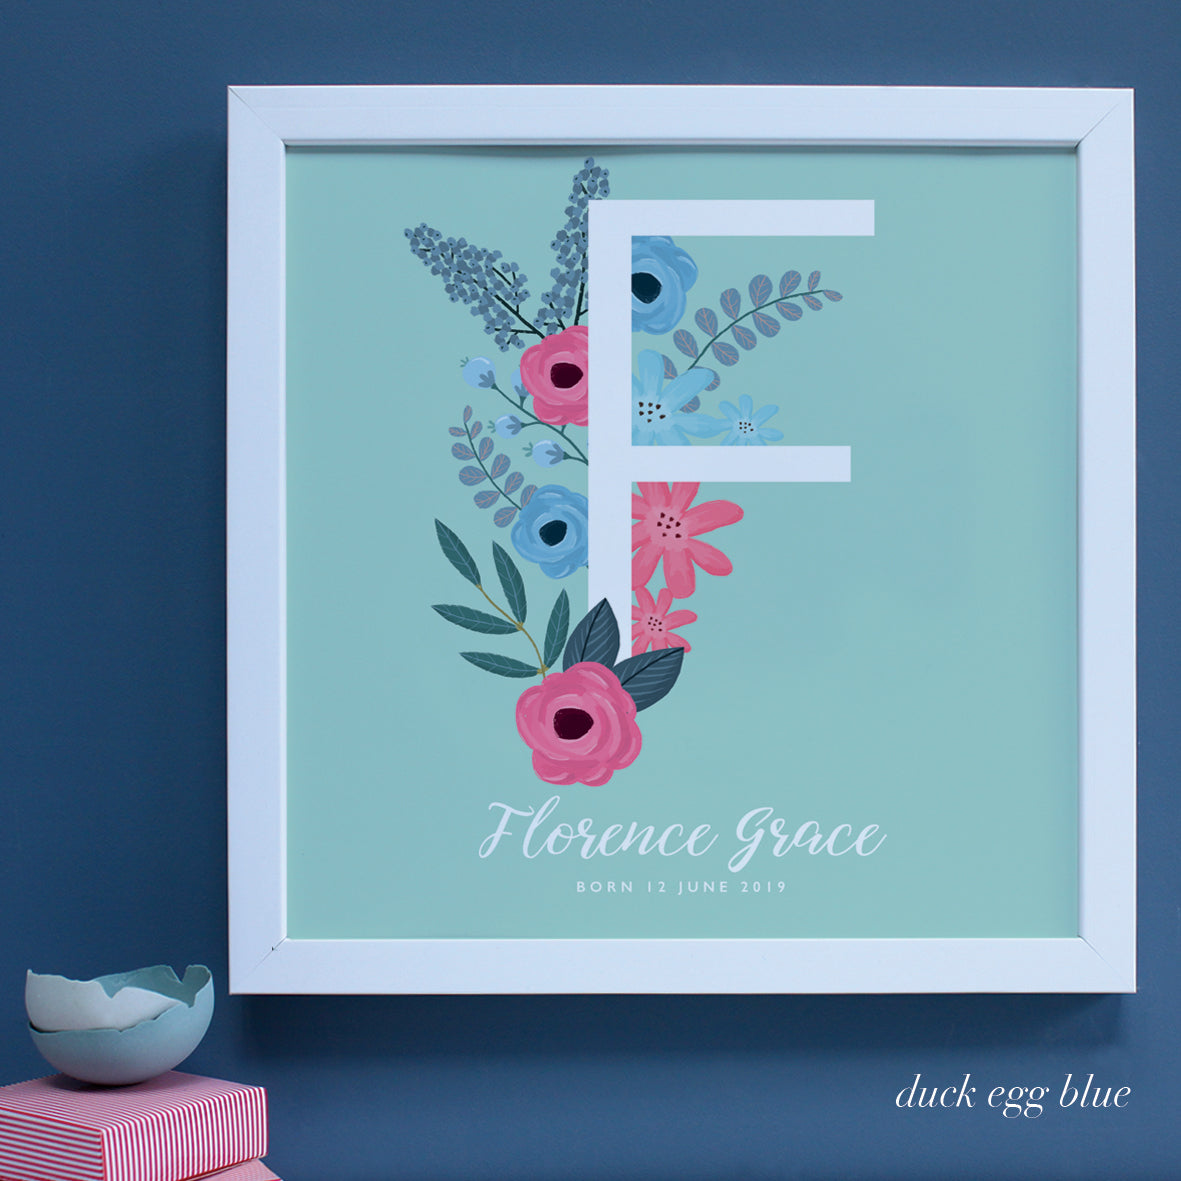 Large white framed New Baby present with letter F on duck egg blue background.